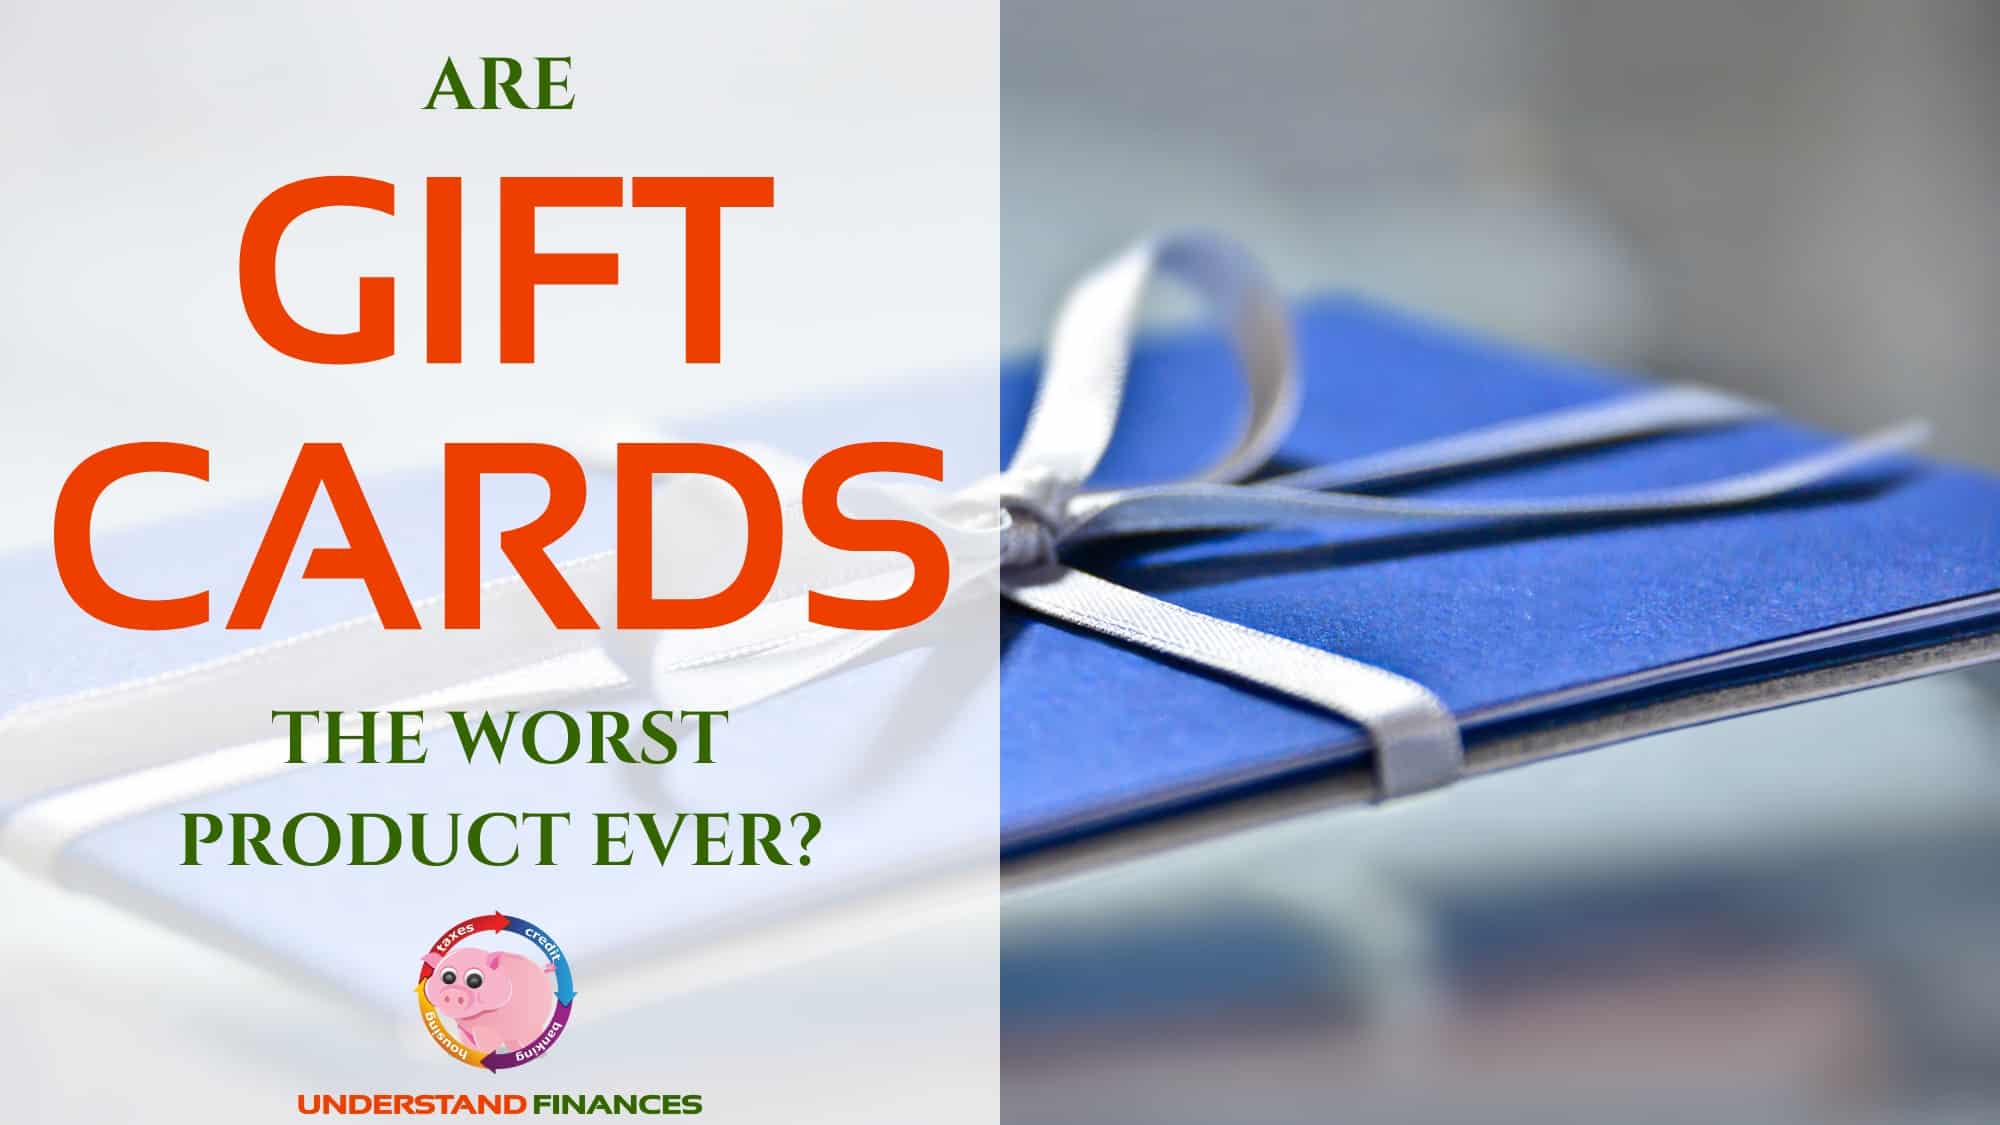 Are Gift Cards Are The Worst Product Ever?